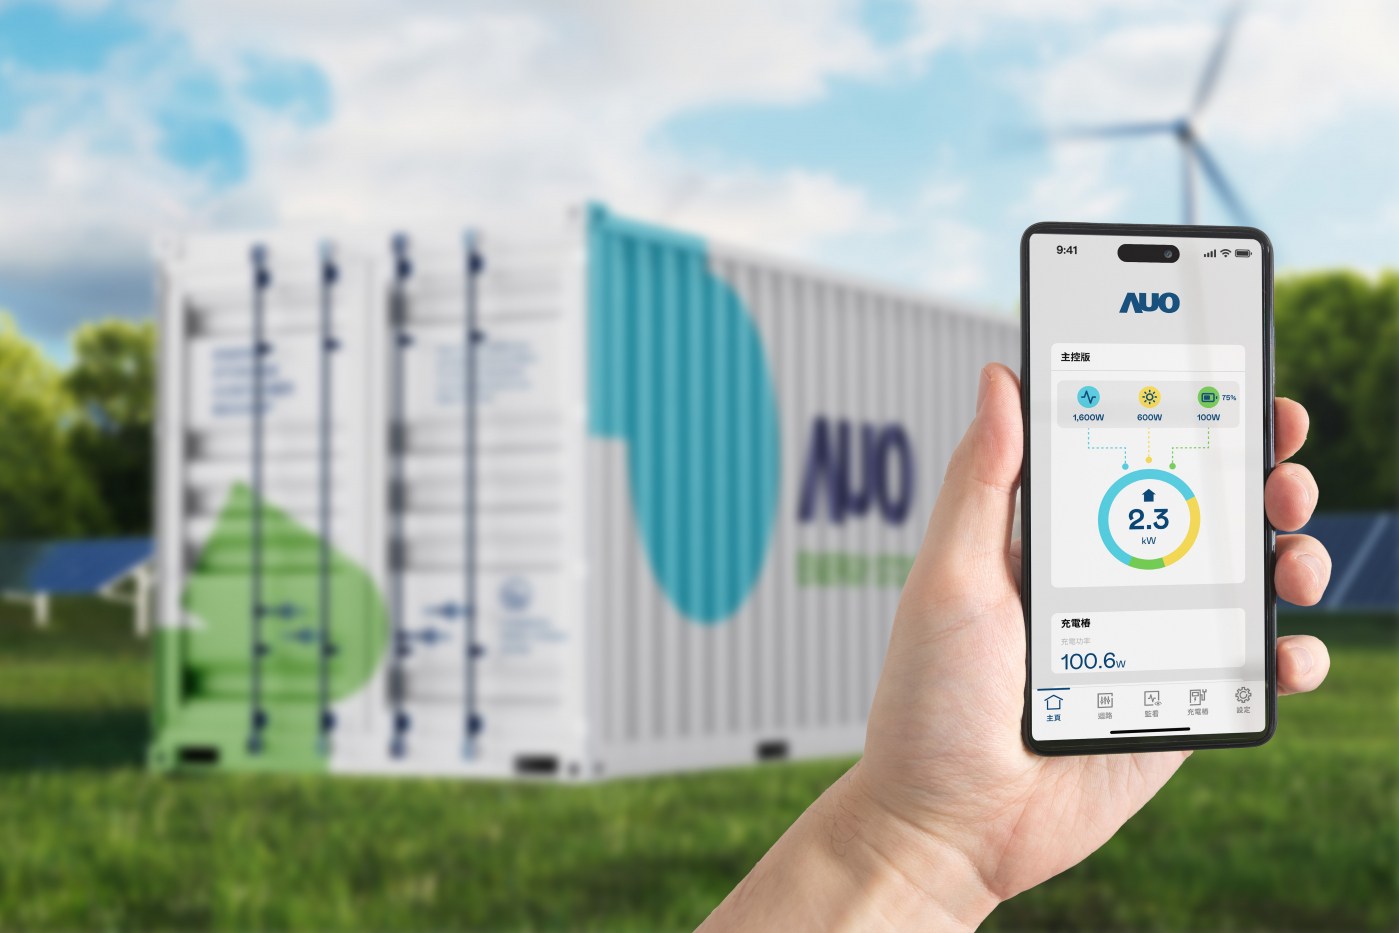 AUO has developed the EnLink energy data collector, which integrates energy information from various devices in different settings to facilitate visualized energy management. This Achieves more immediate, suitable, and efficient energy management for enhanced energy conservation effectiveness